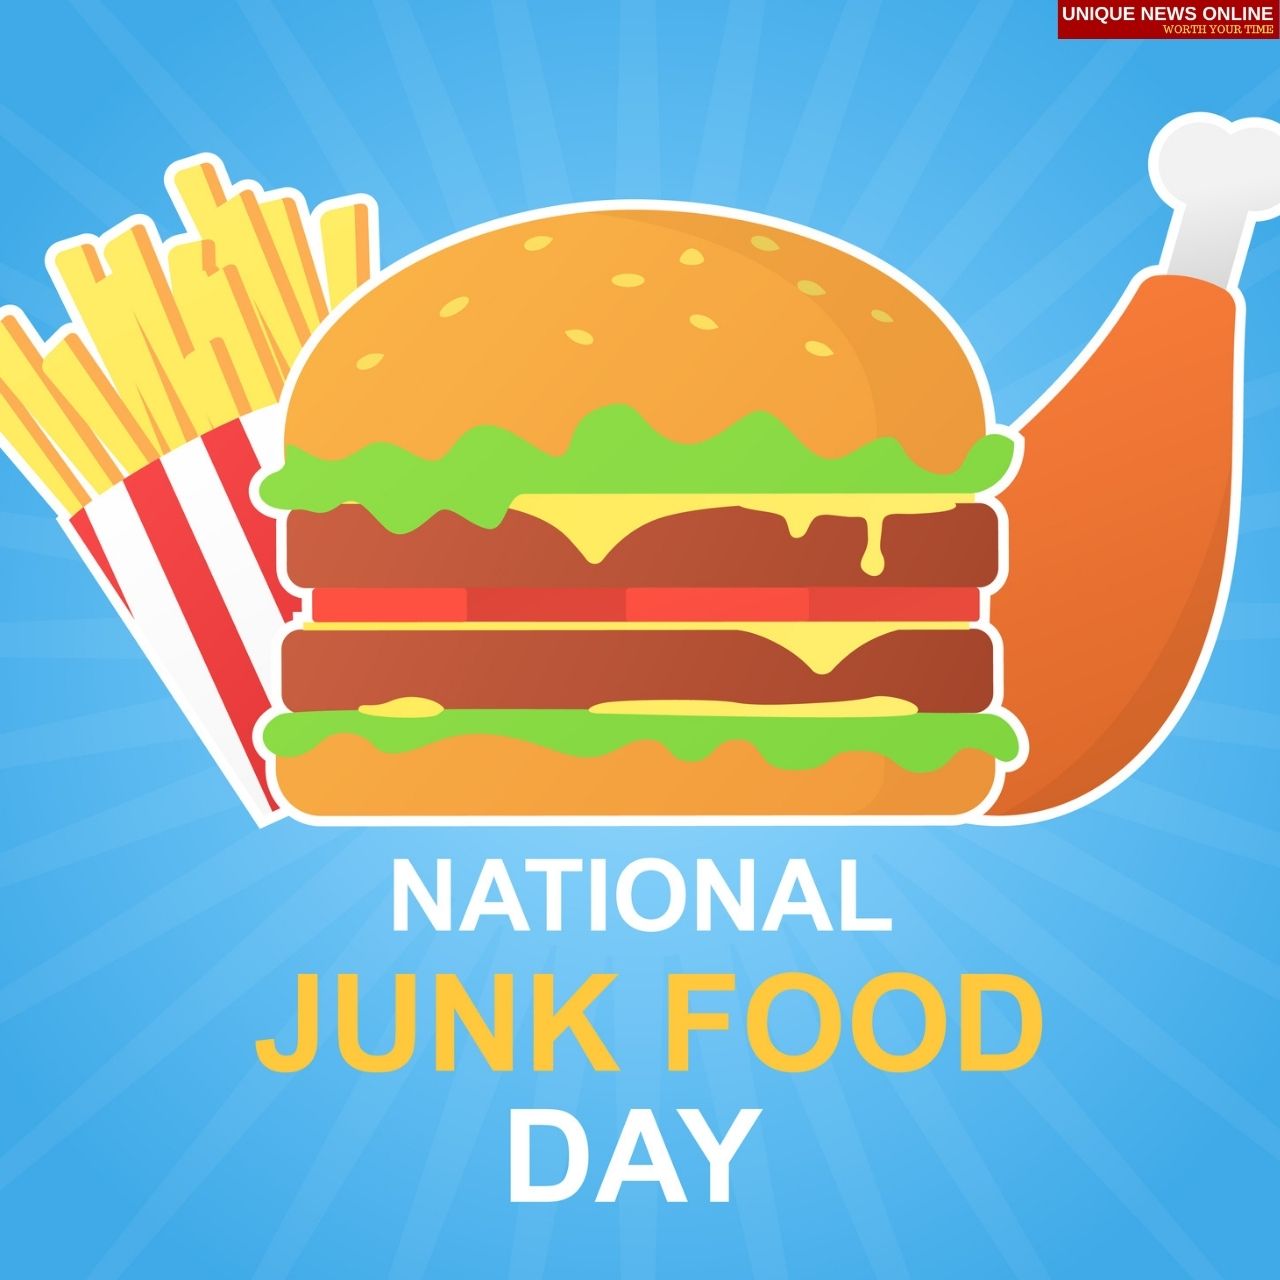 National Junk Food Day (US) 2021 Quotes, HD Images, Meme, and Gif